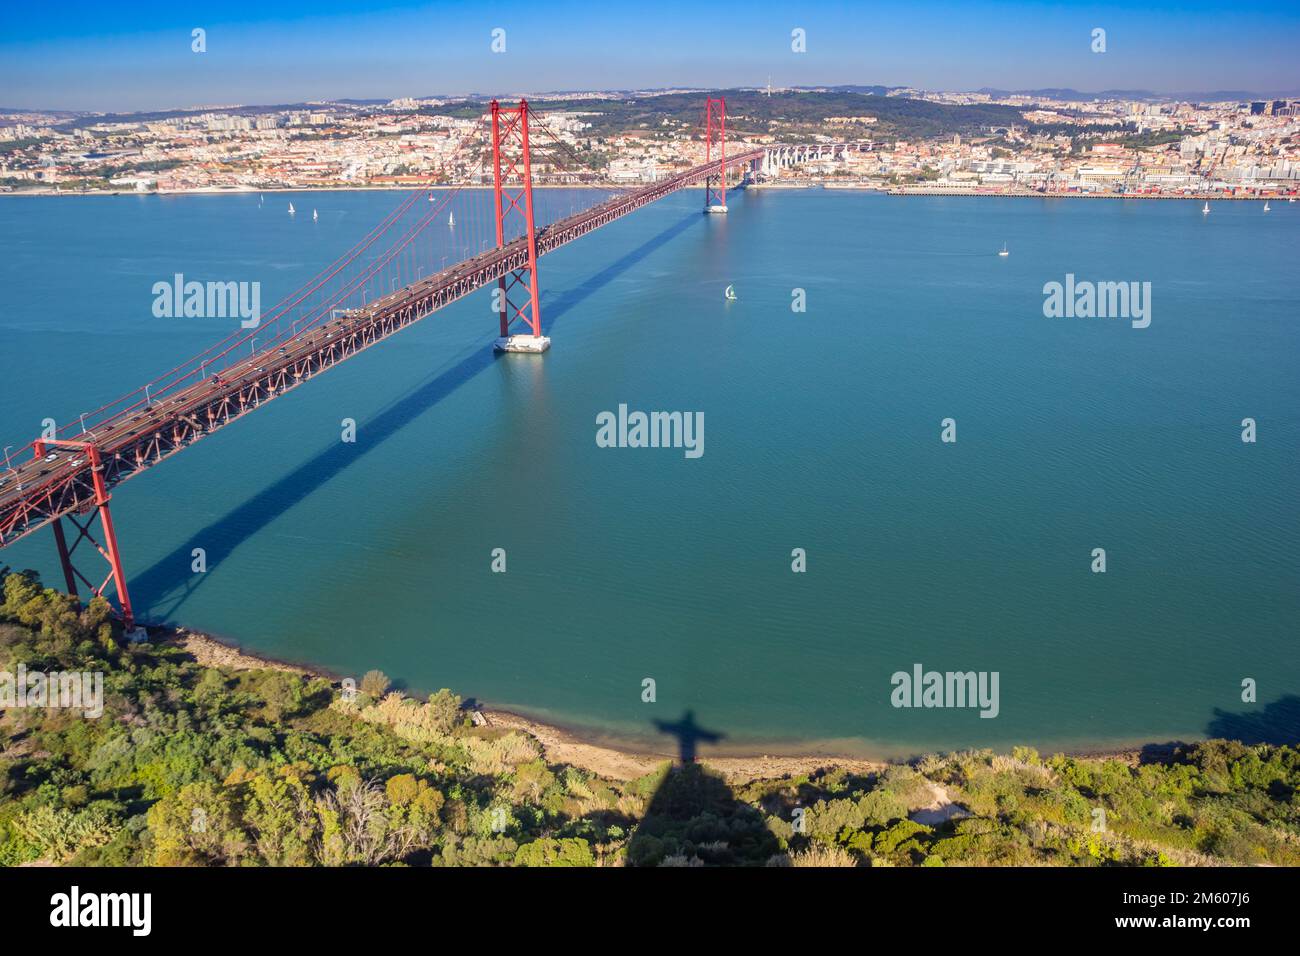 Shadow of the Christ statue in front of the historic red suspension bridge in Lisbon, Portugal Stock Photo